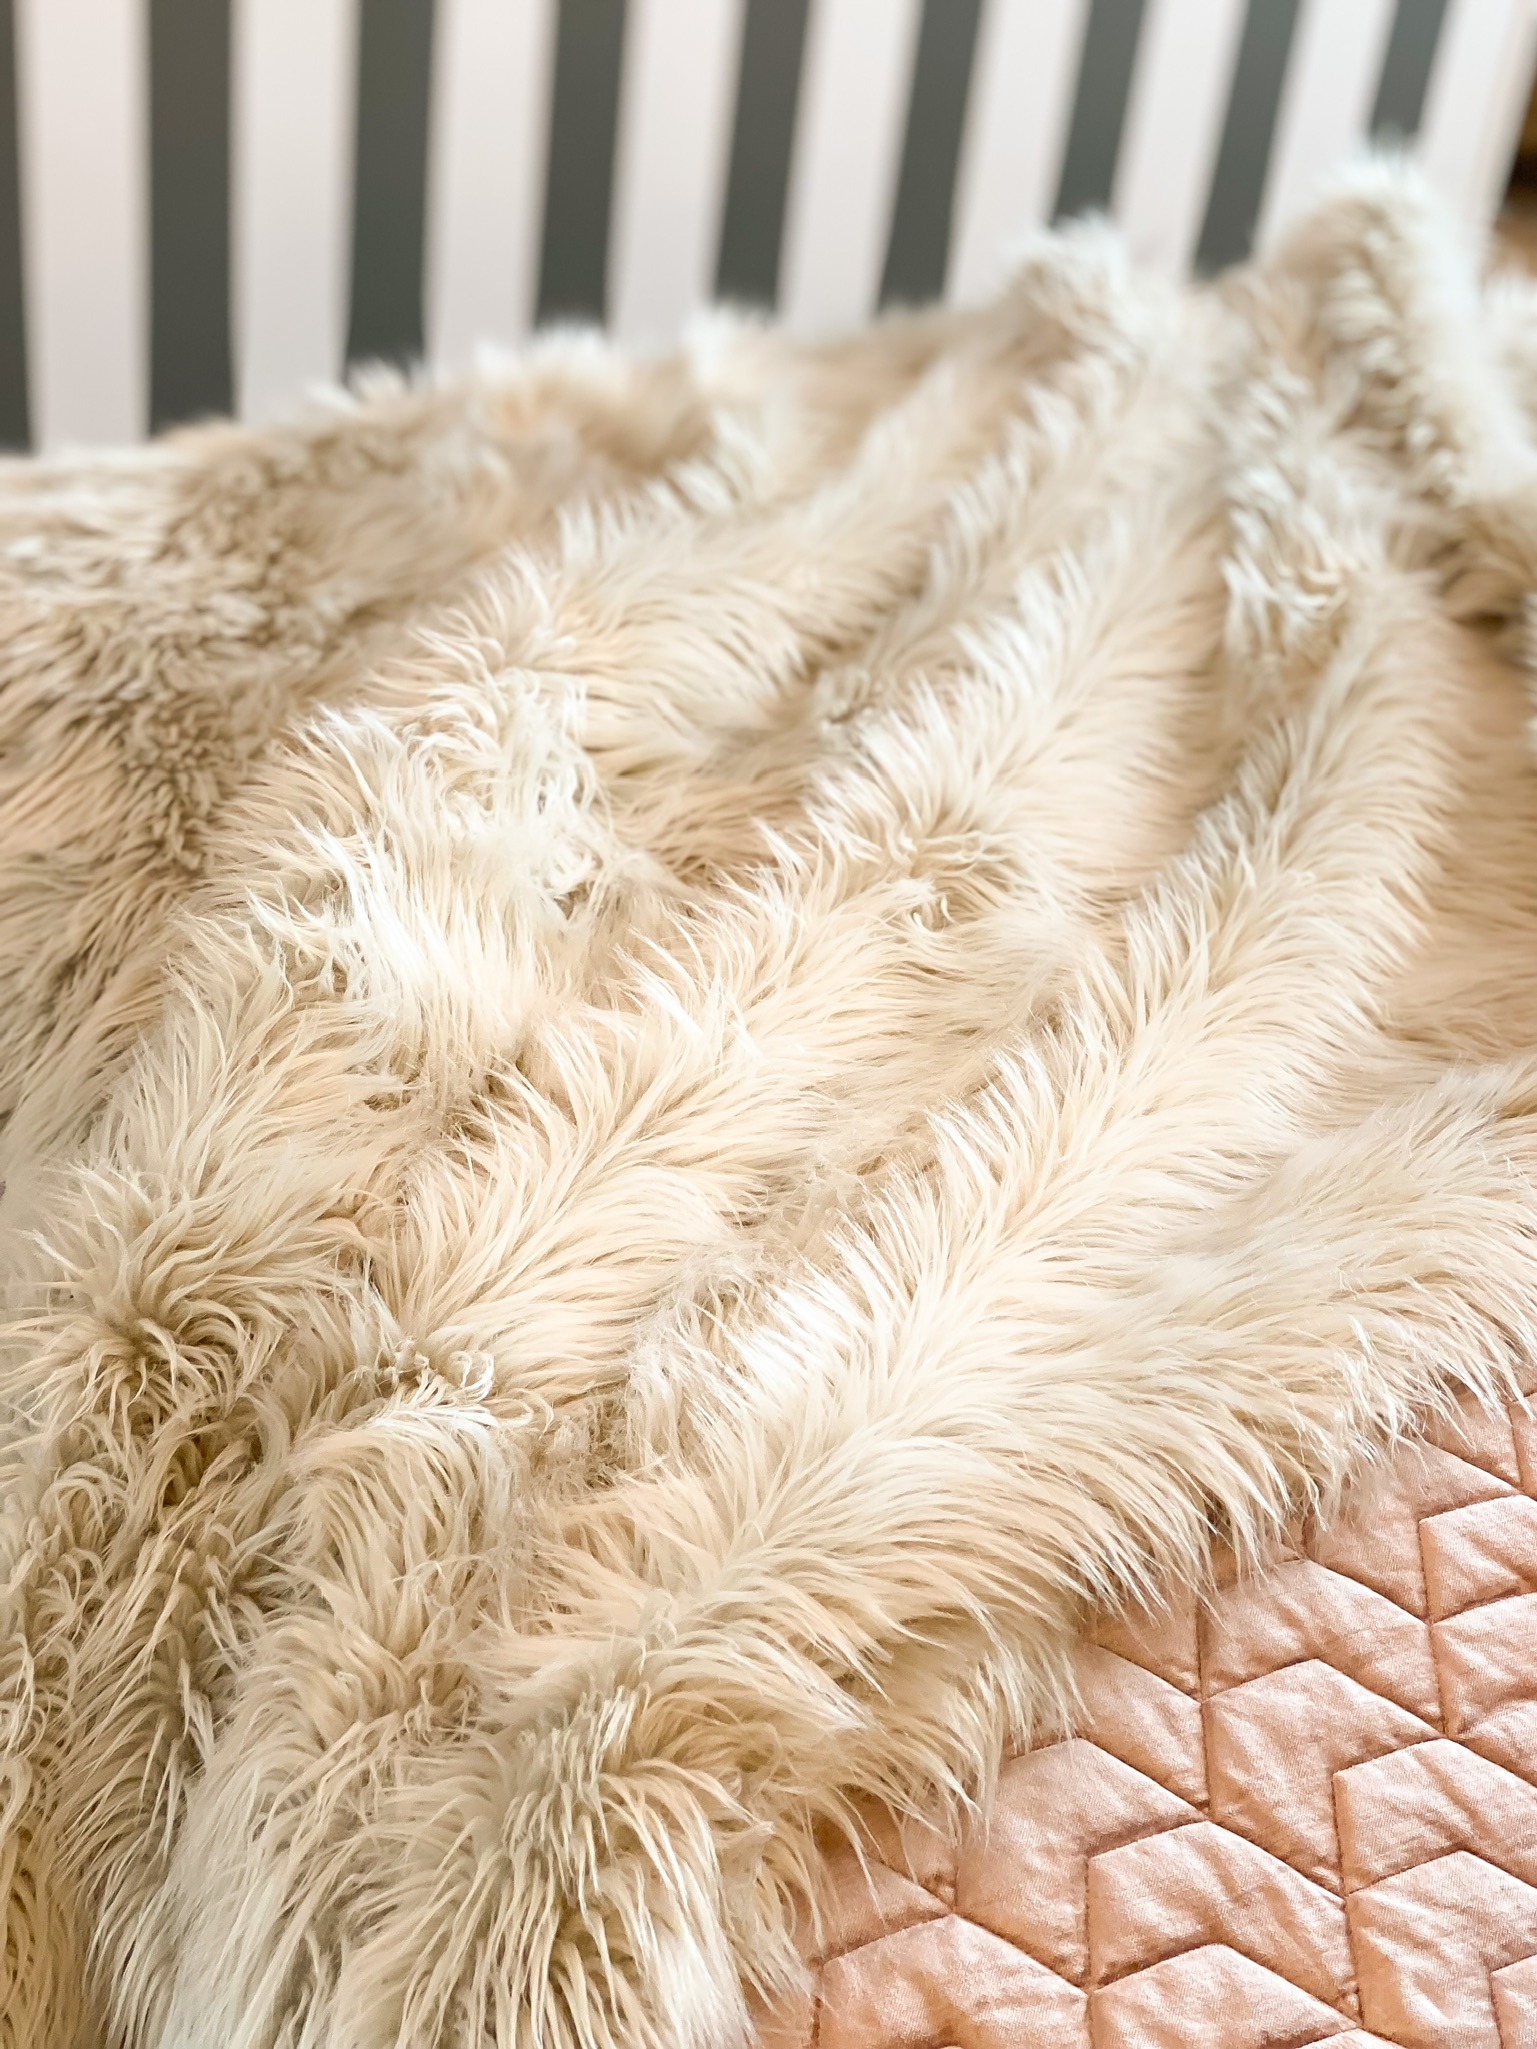 Its all about the detailing with this stylish fur blanket bedspread in hale